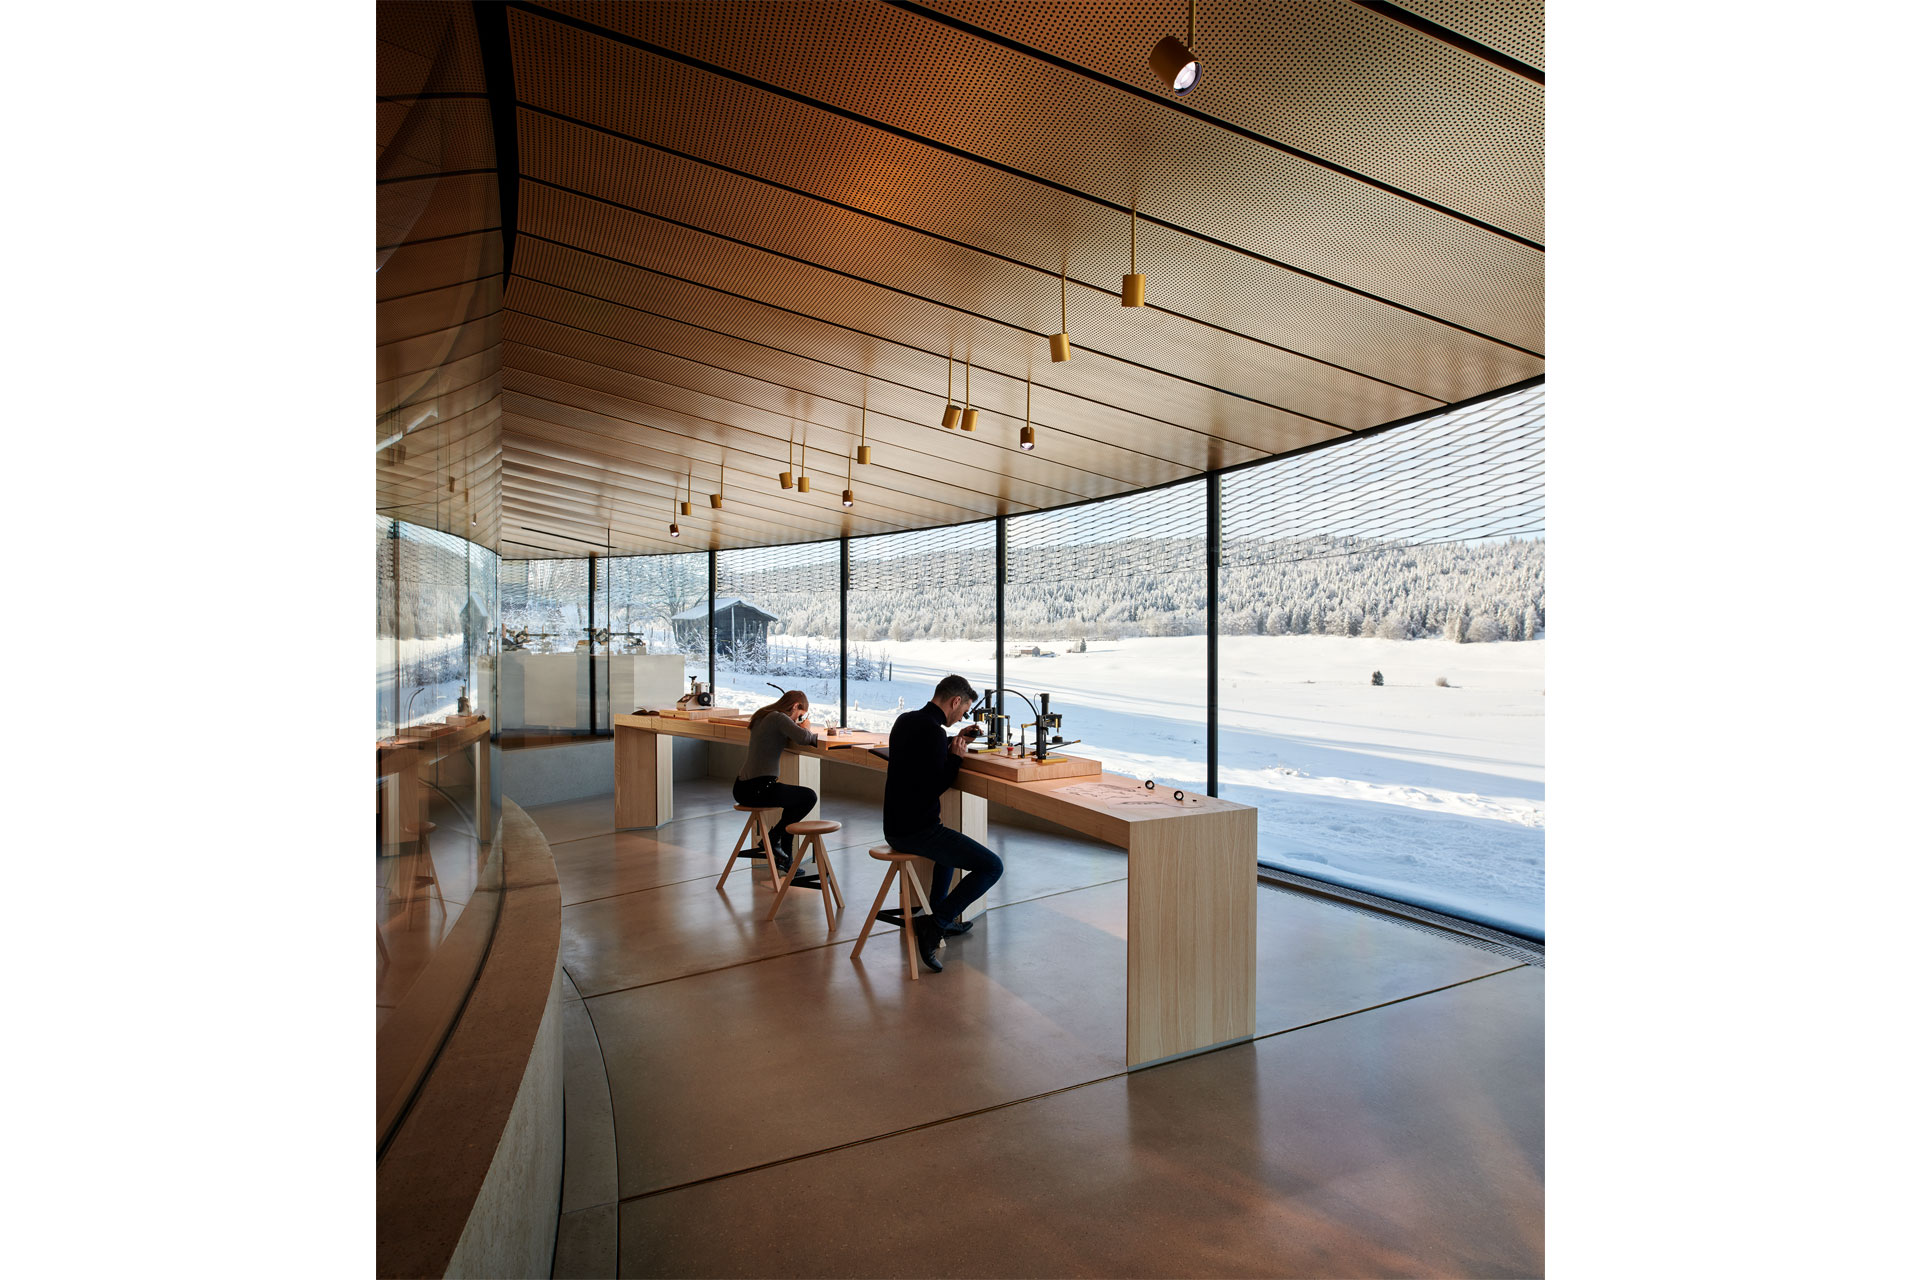 Audemars Piguet’s museum, allowing customers to learn more about jewellery and watches